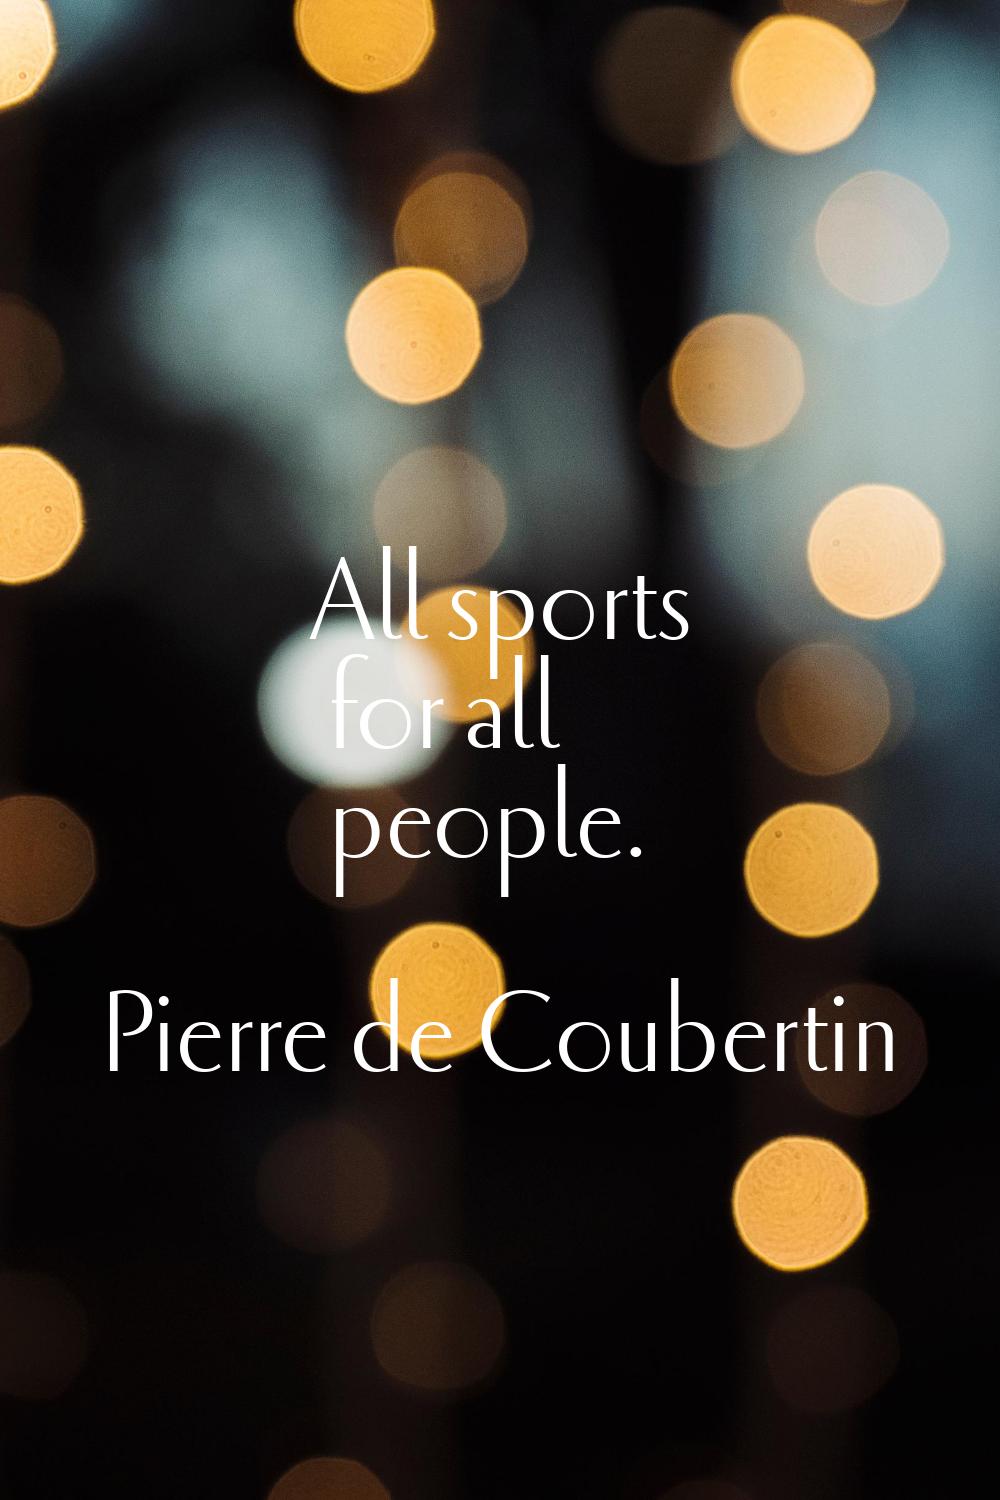 All sports for all people.